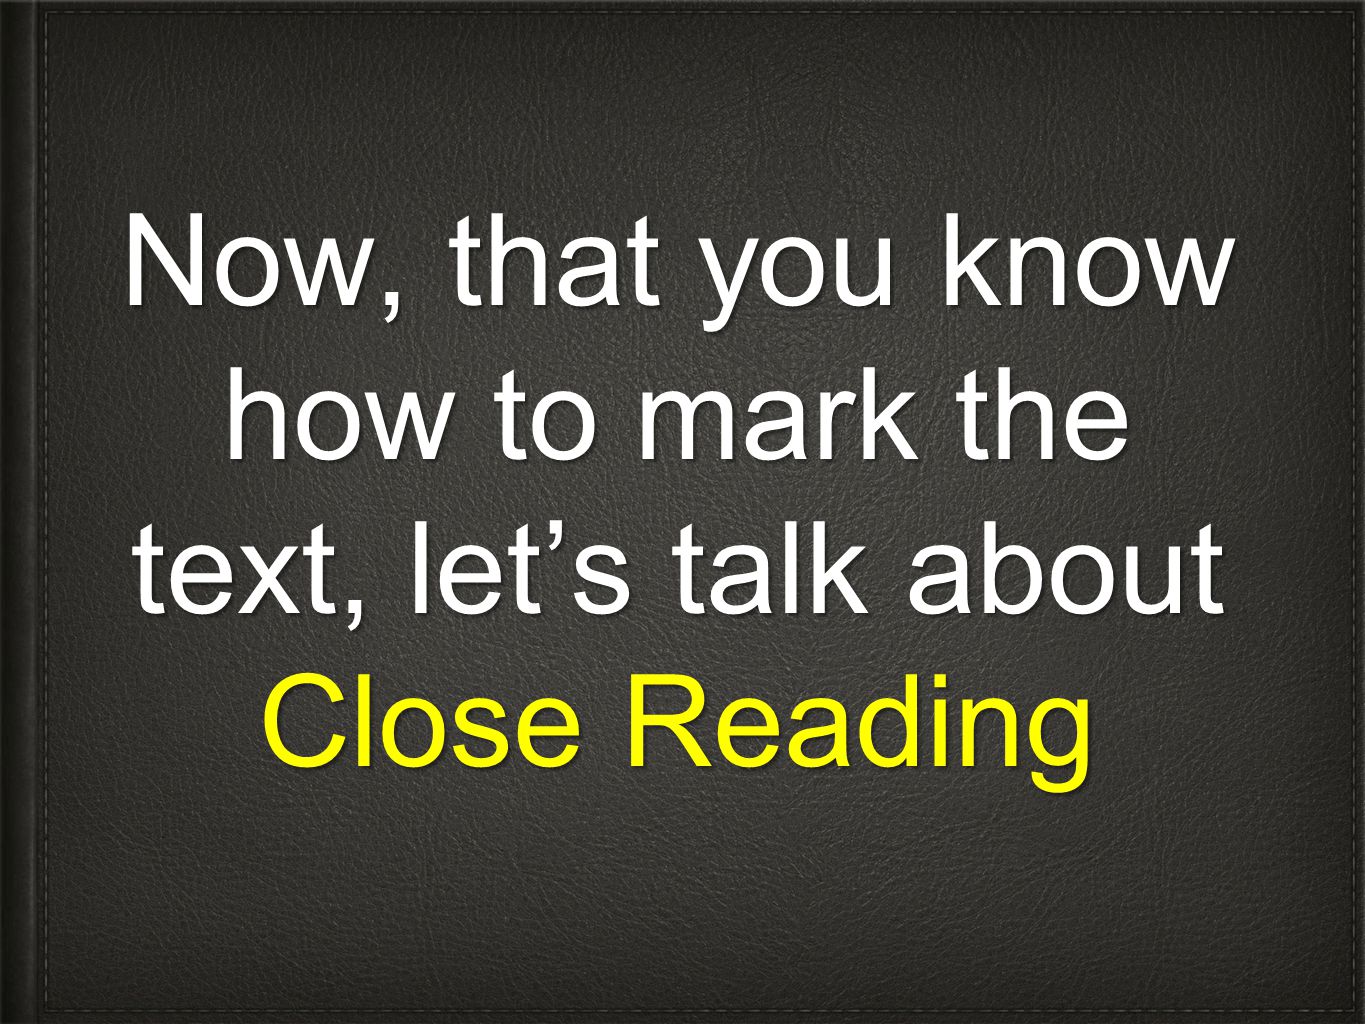 Now, that you know how to mark the text, let’s talk about Close Reading